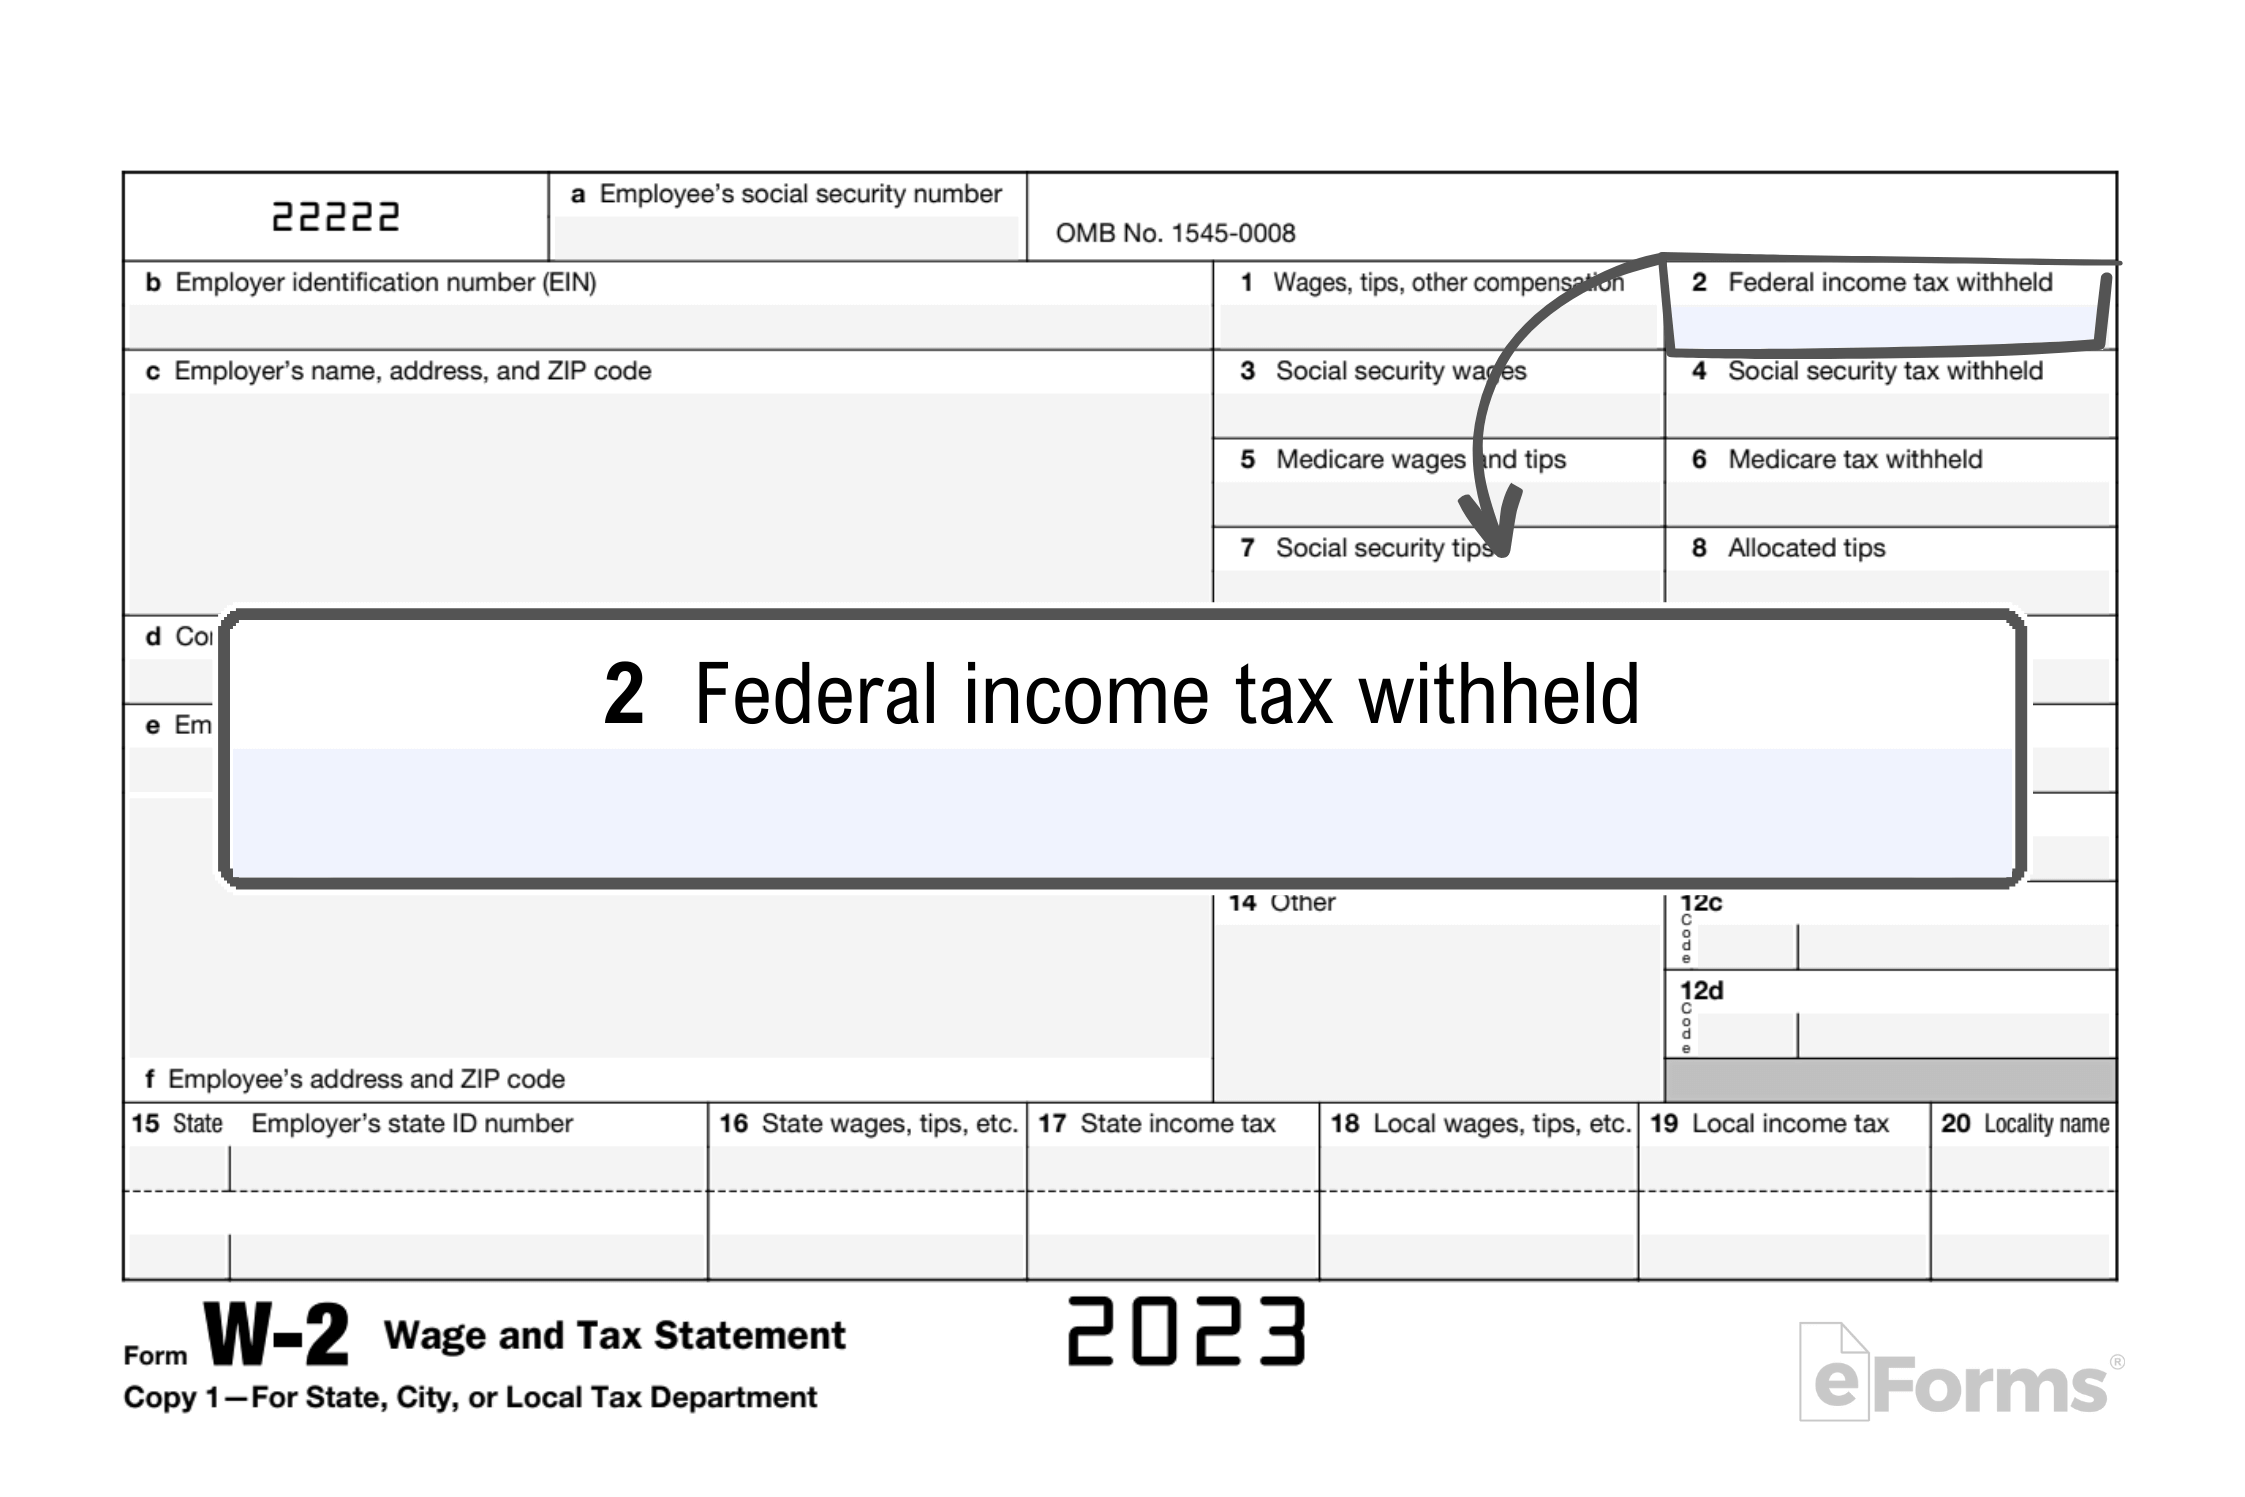 Free Irs Form W-2 | Wage And Tax Statement - Pdf – Eforms inside Download My W2 Form